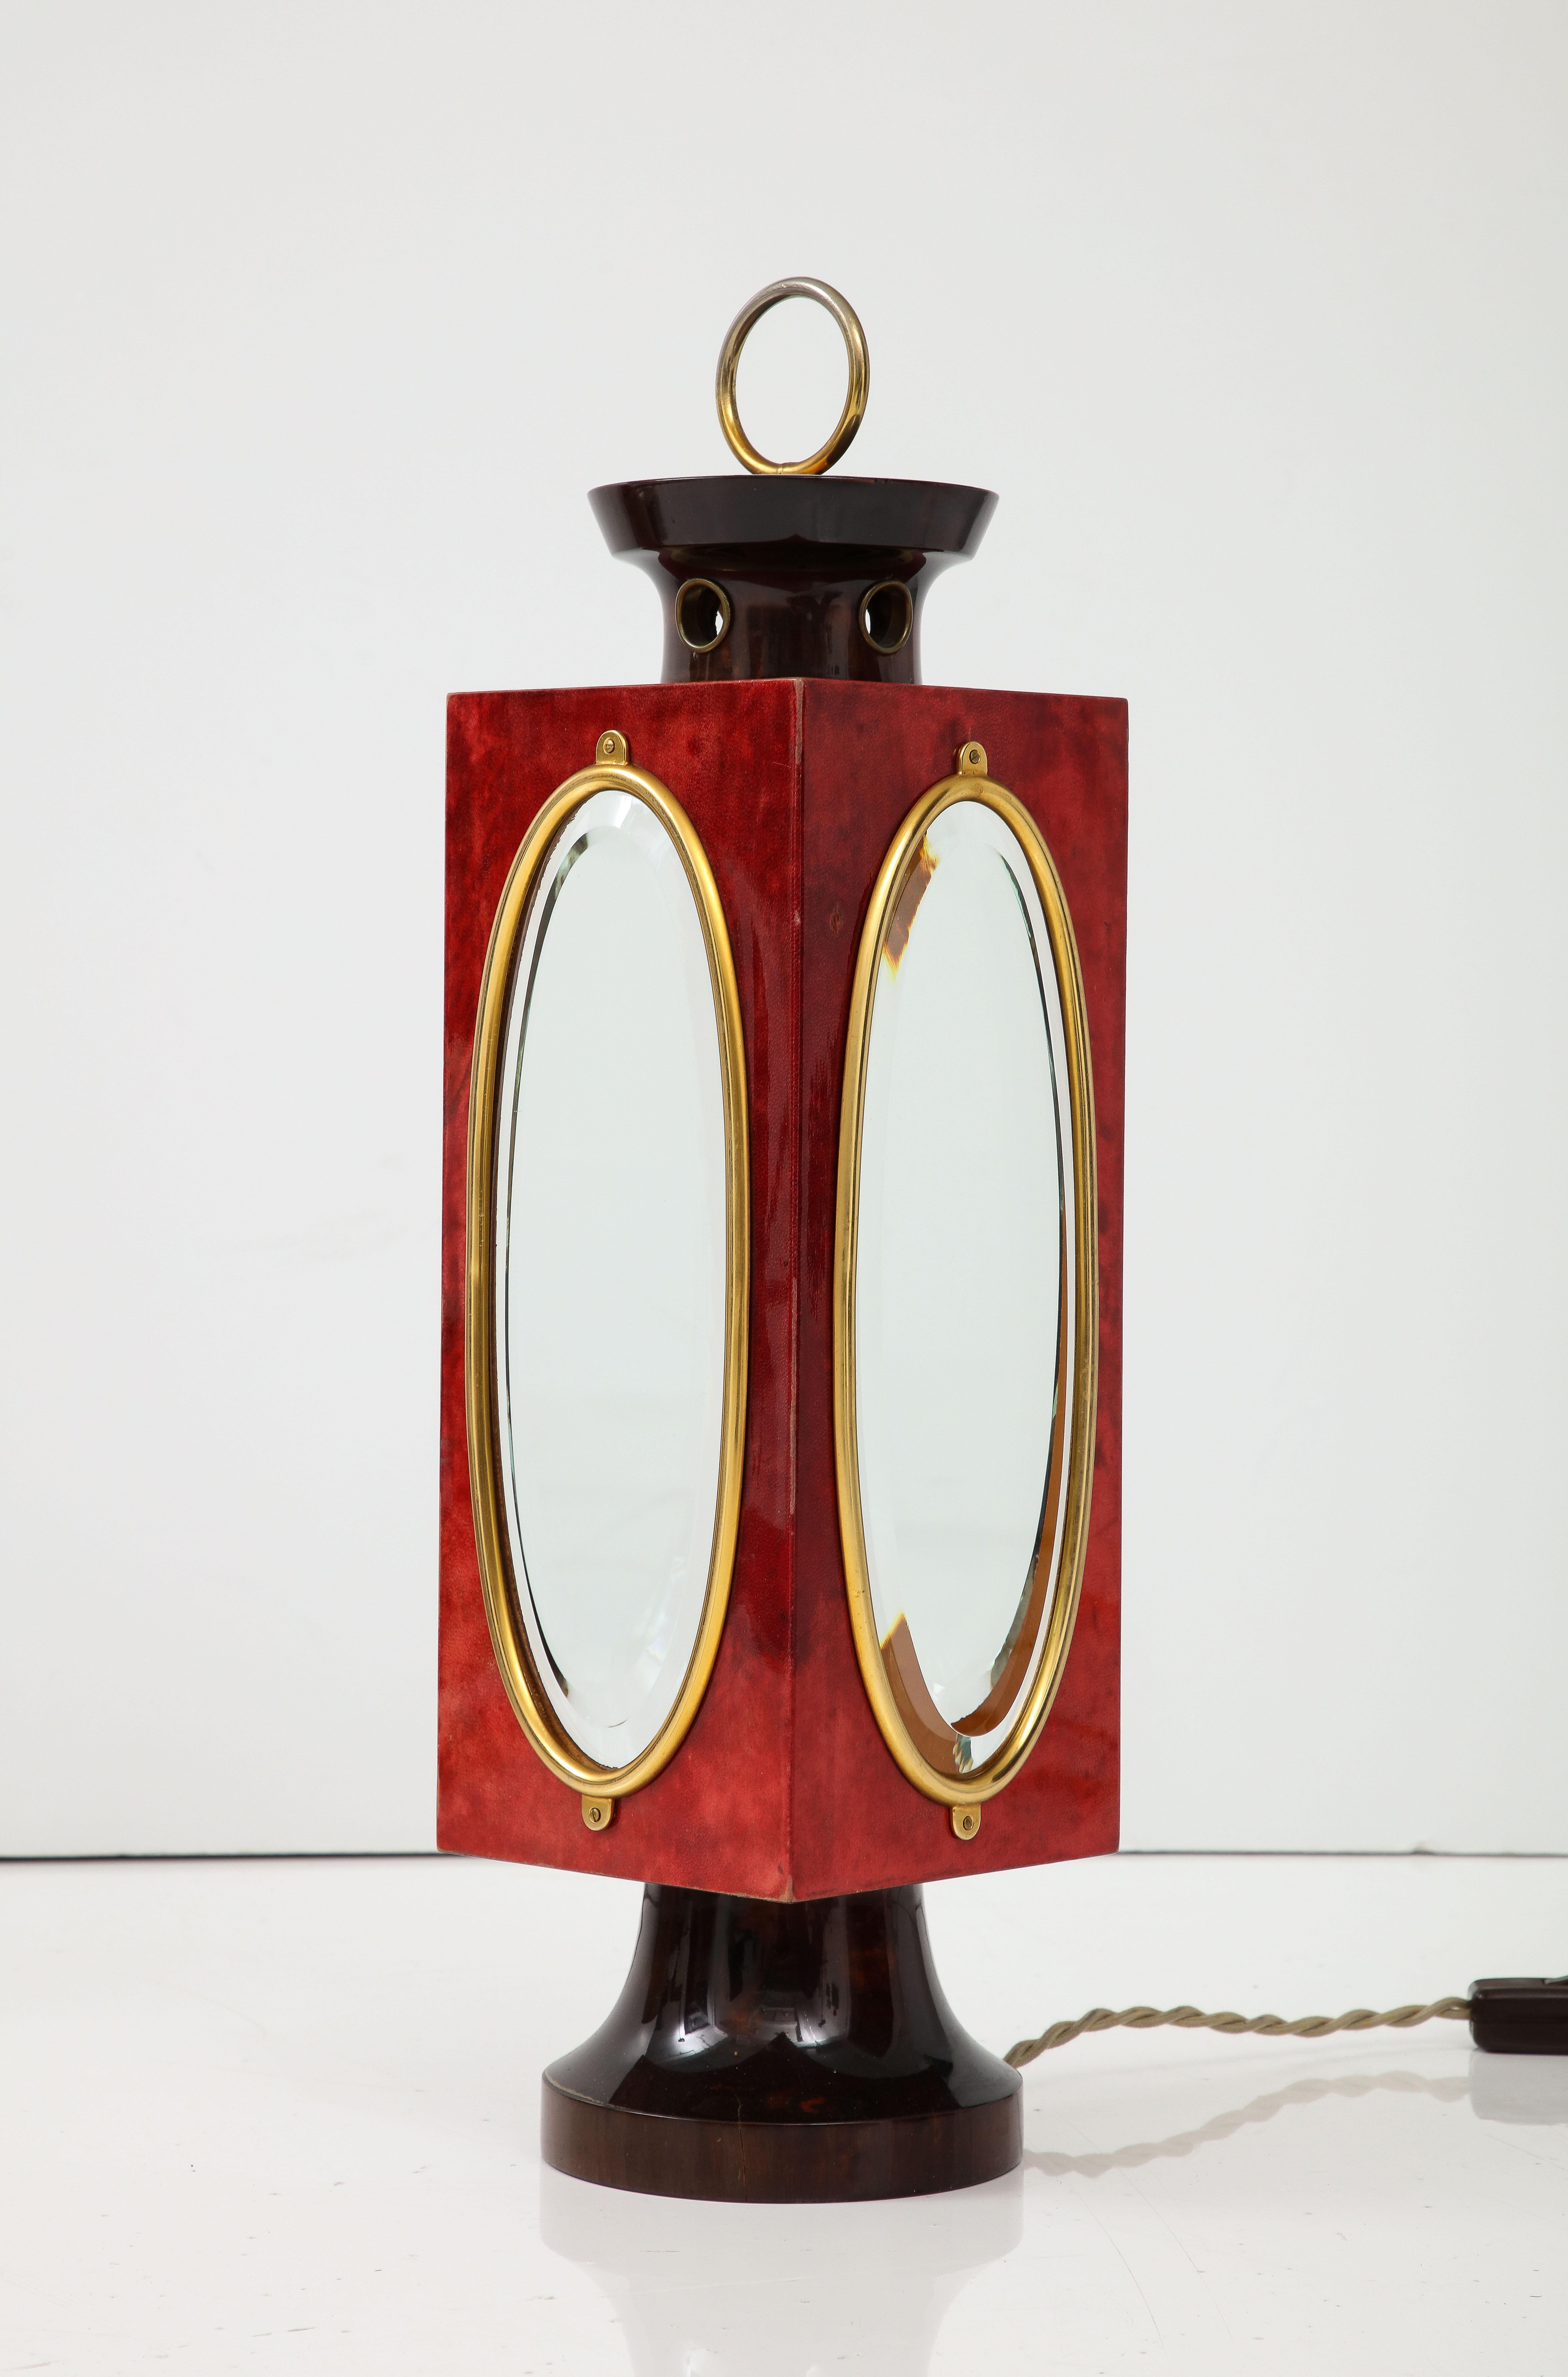 Signed Red Velum and Lacquered Wood Table Lantern Lamp, Aldo Tura, Italy, 1970s For Sale 3